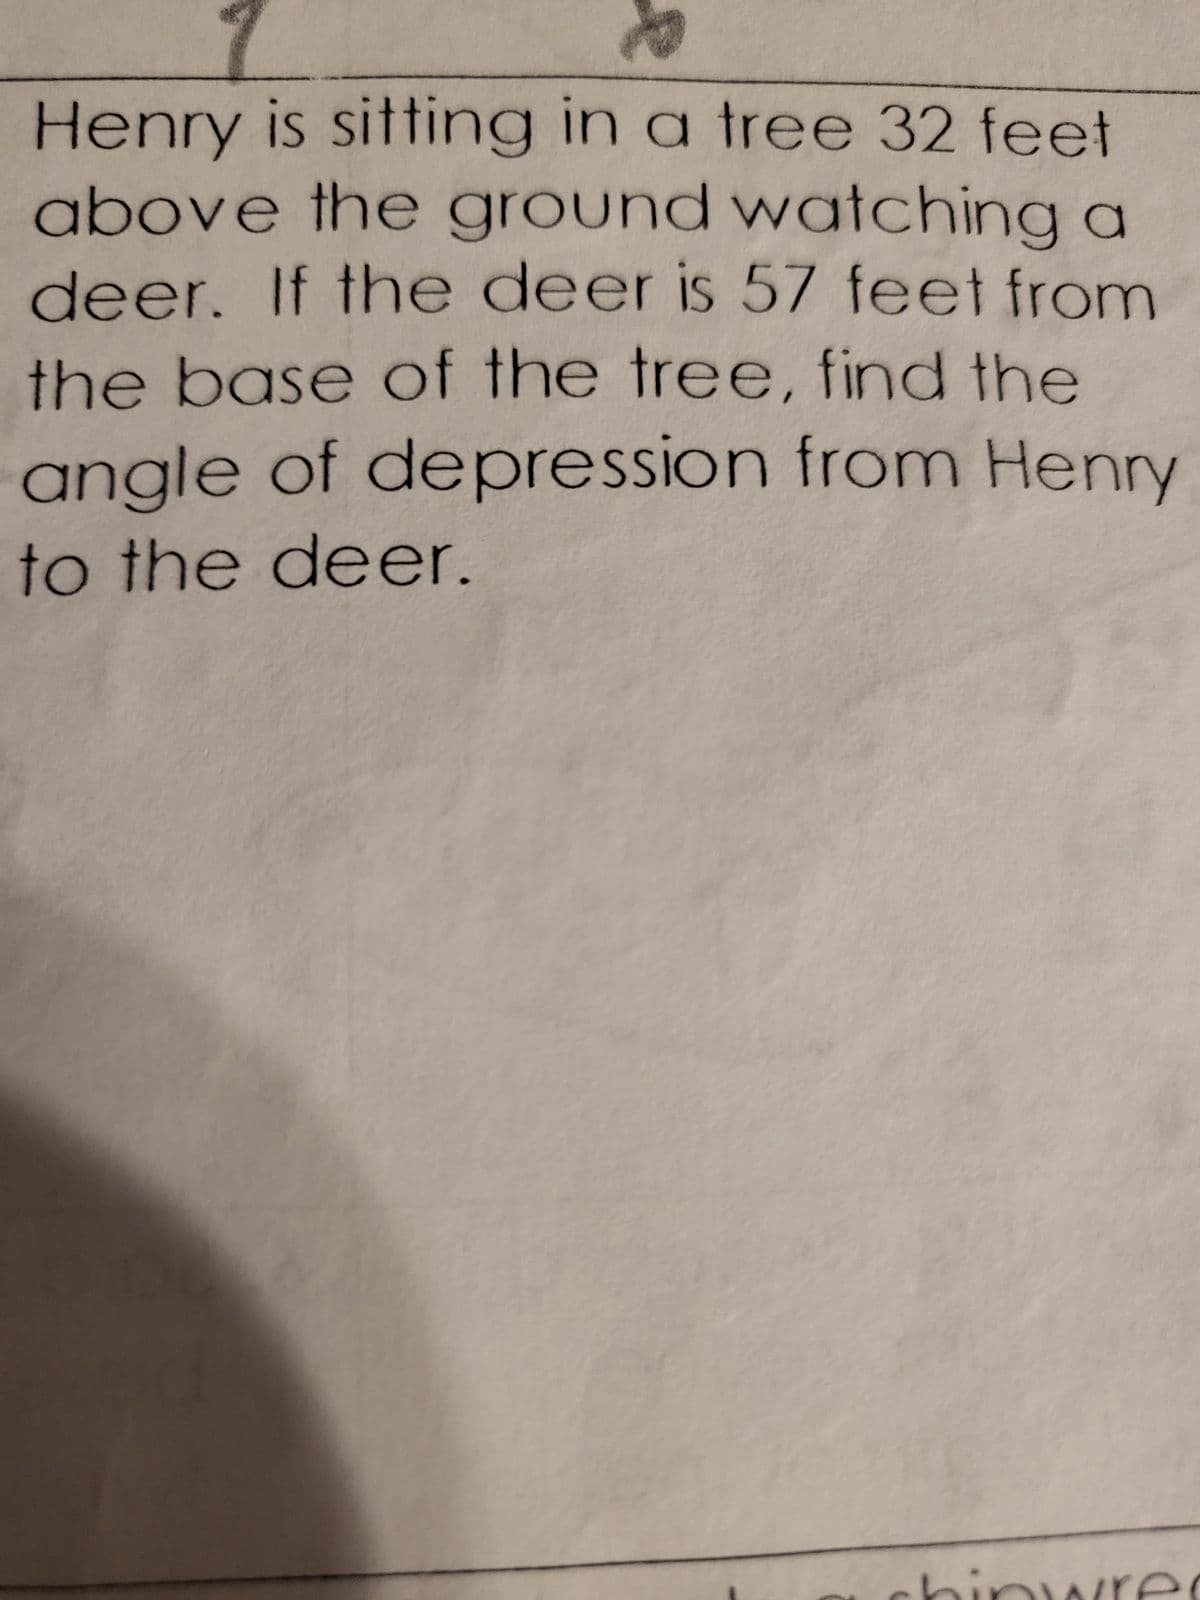 Henry is sitting in a tree 32 feet
above the ground watching a
deer. If the deer is 57 feet from
the base of the tree, find the
angle of depression from Henry
to the deer.
1